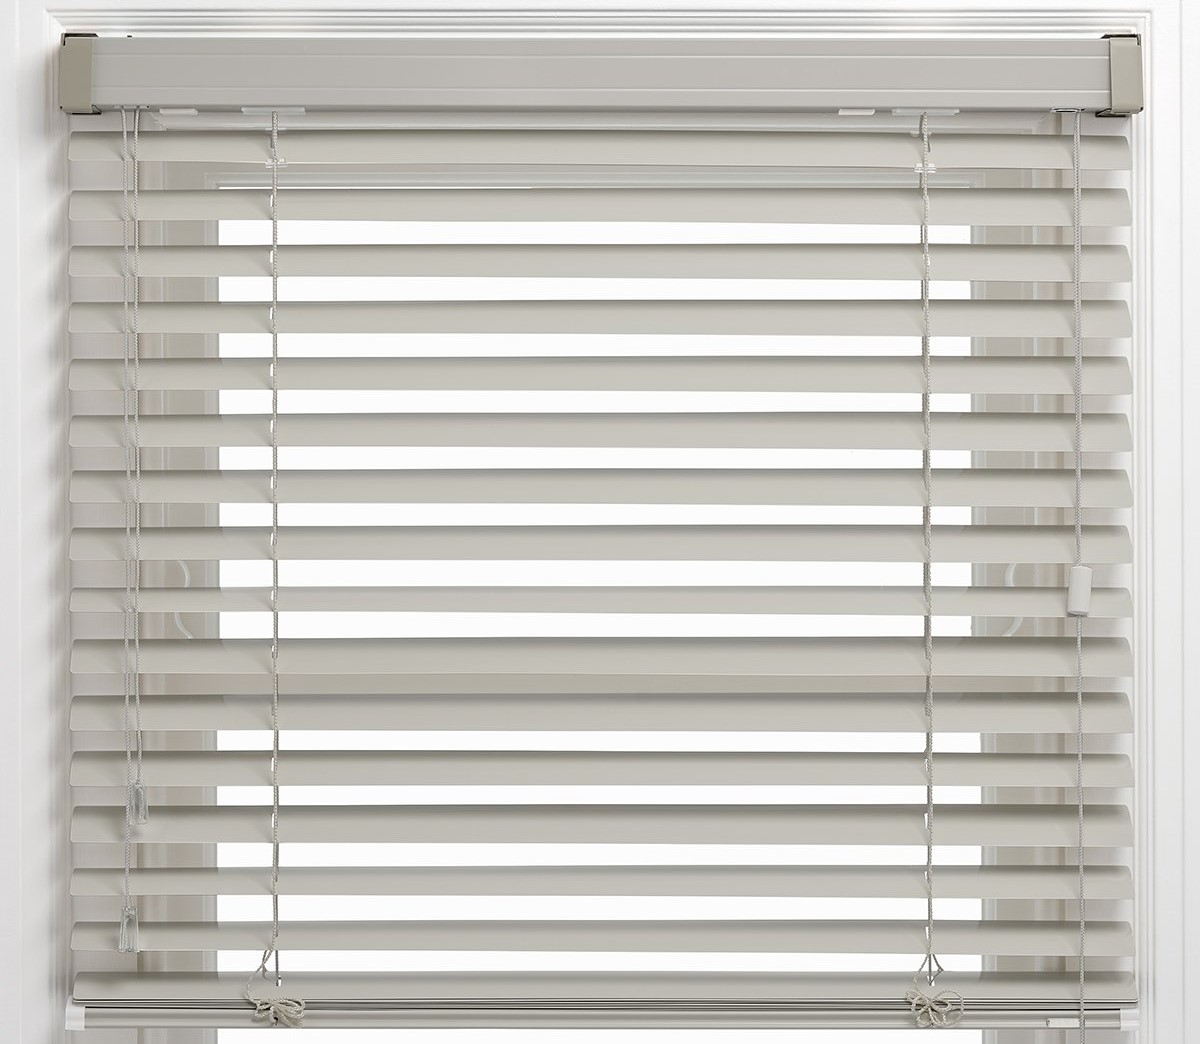 What Are The Parts Of Blinds Called